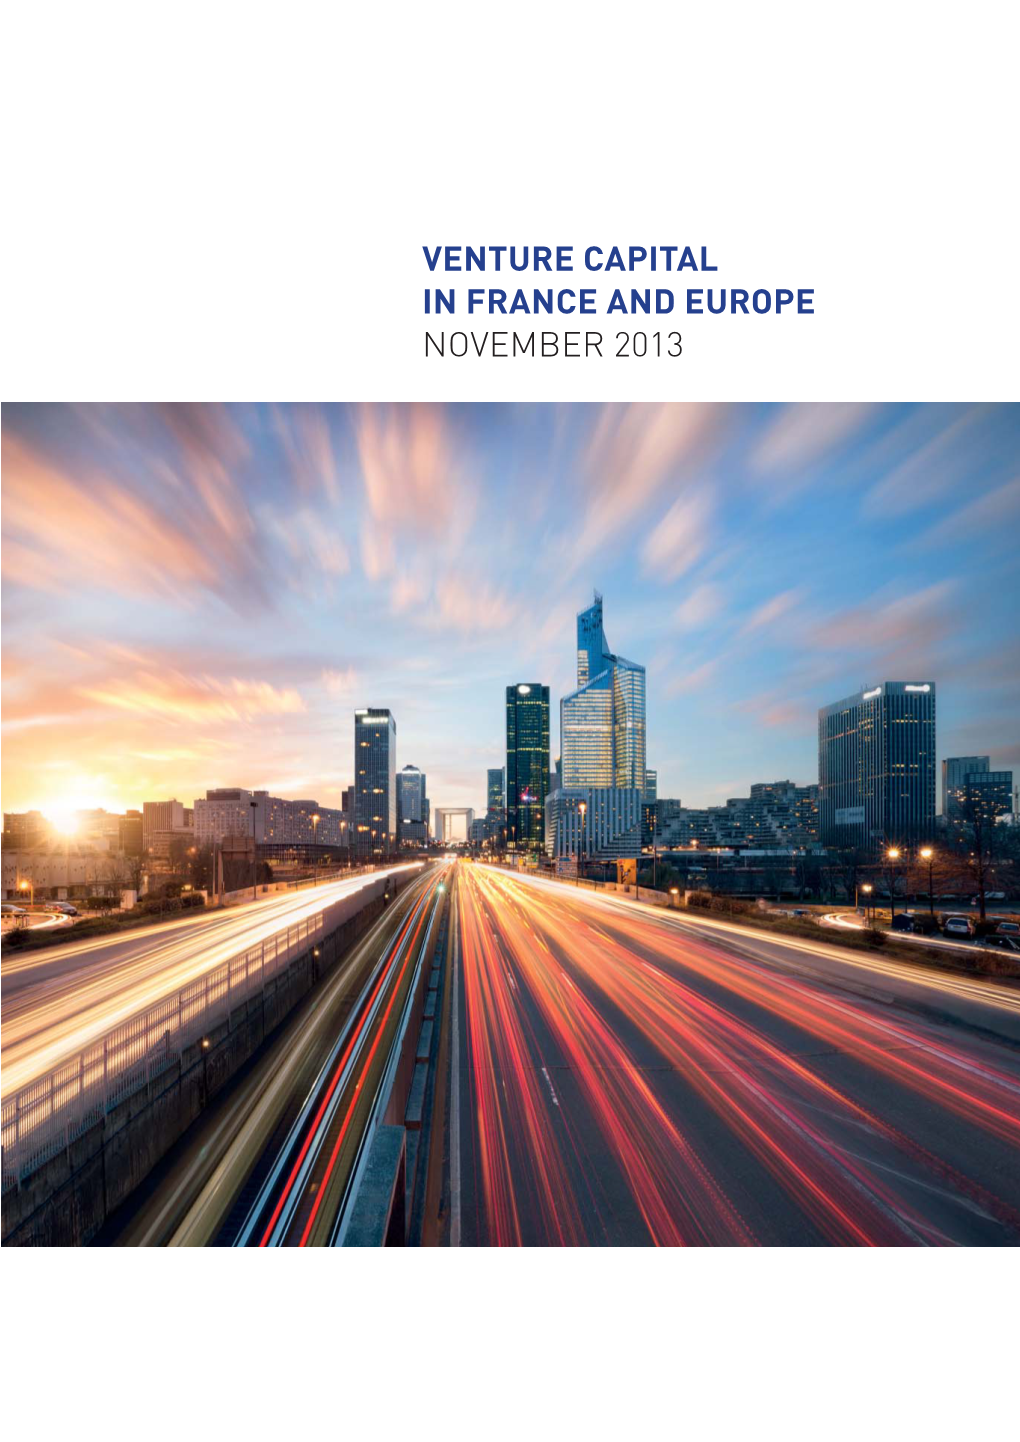 Venture Capital in France and Europe November 2013